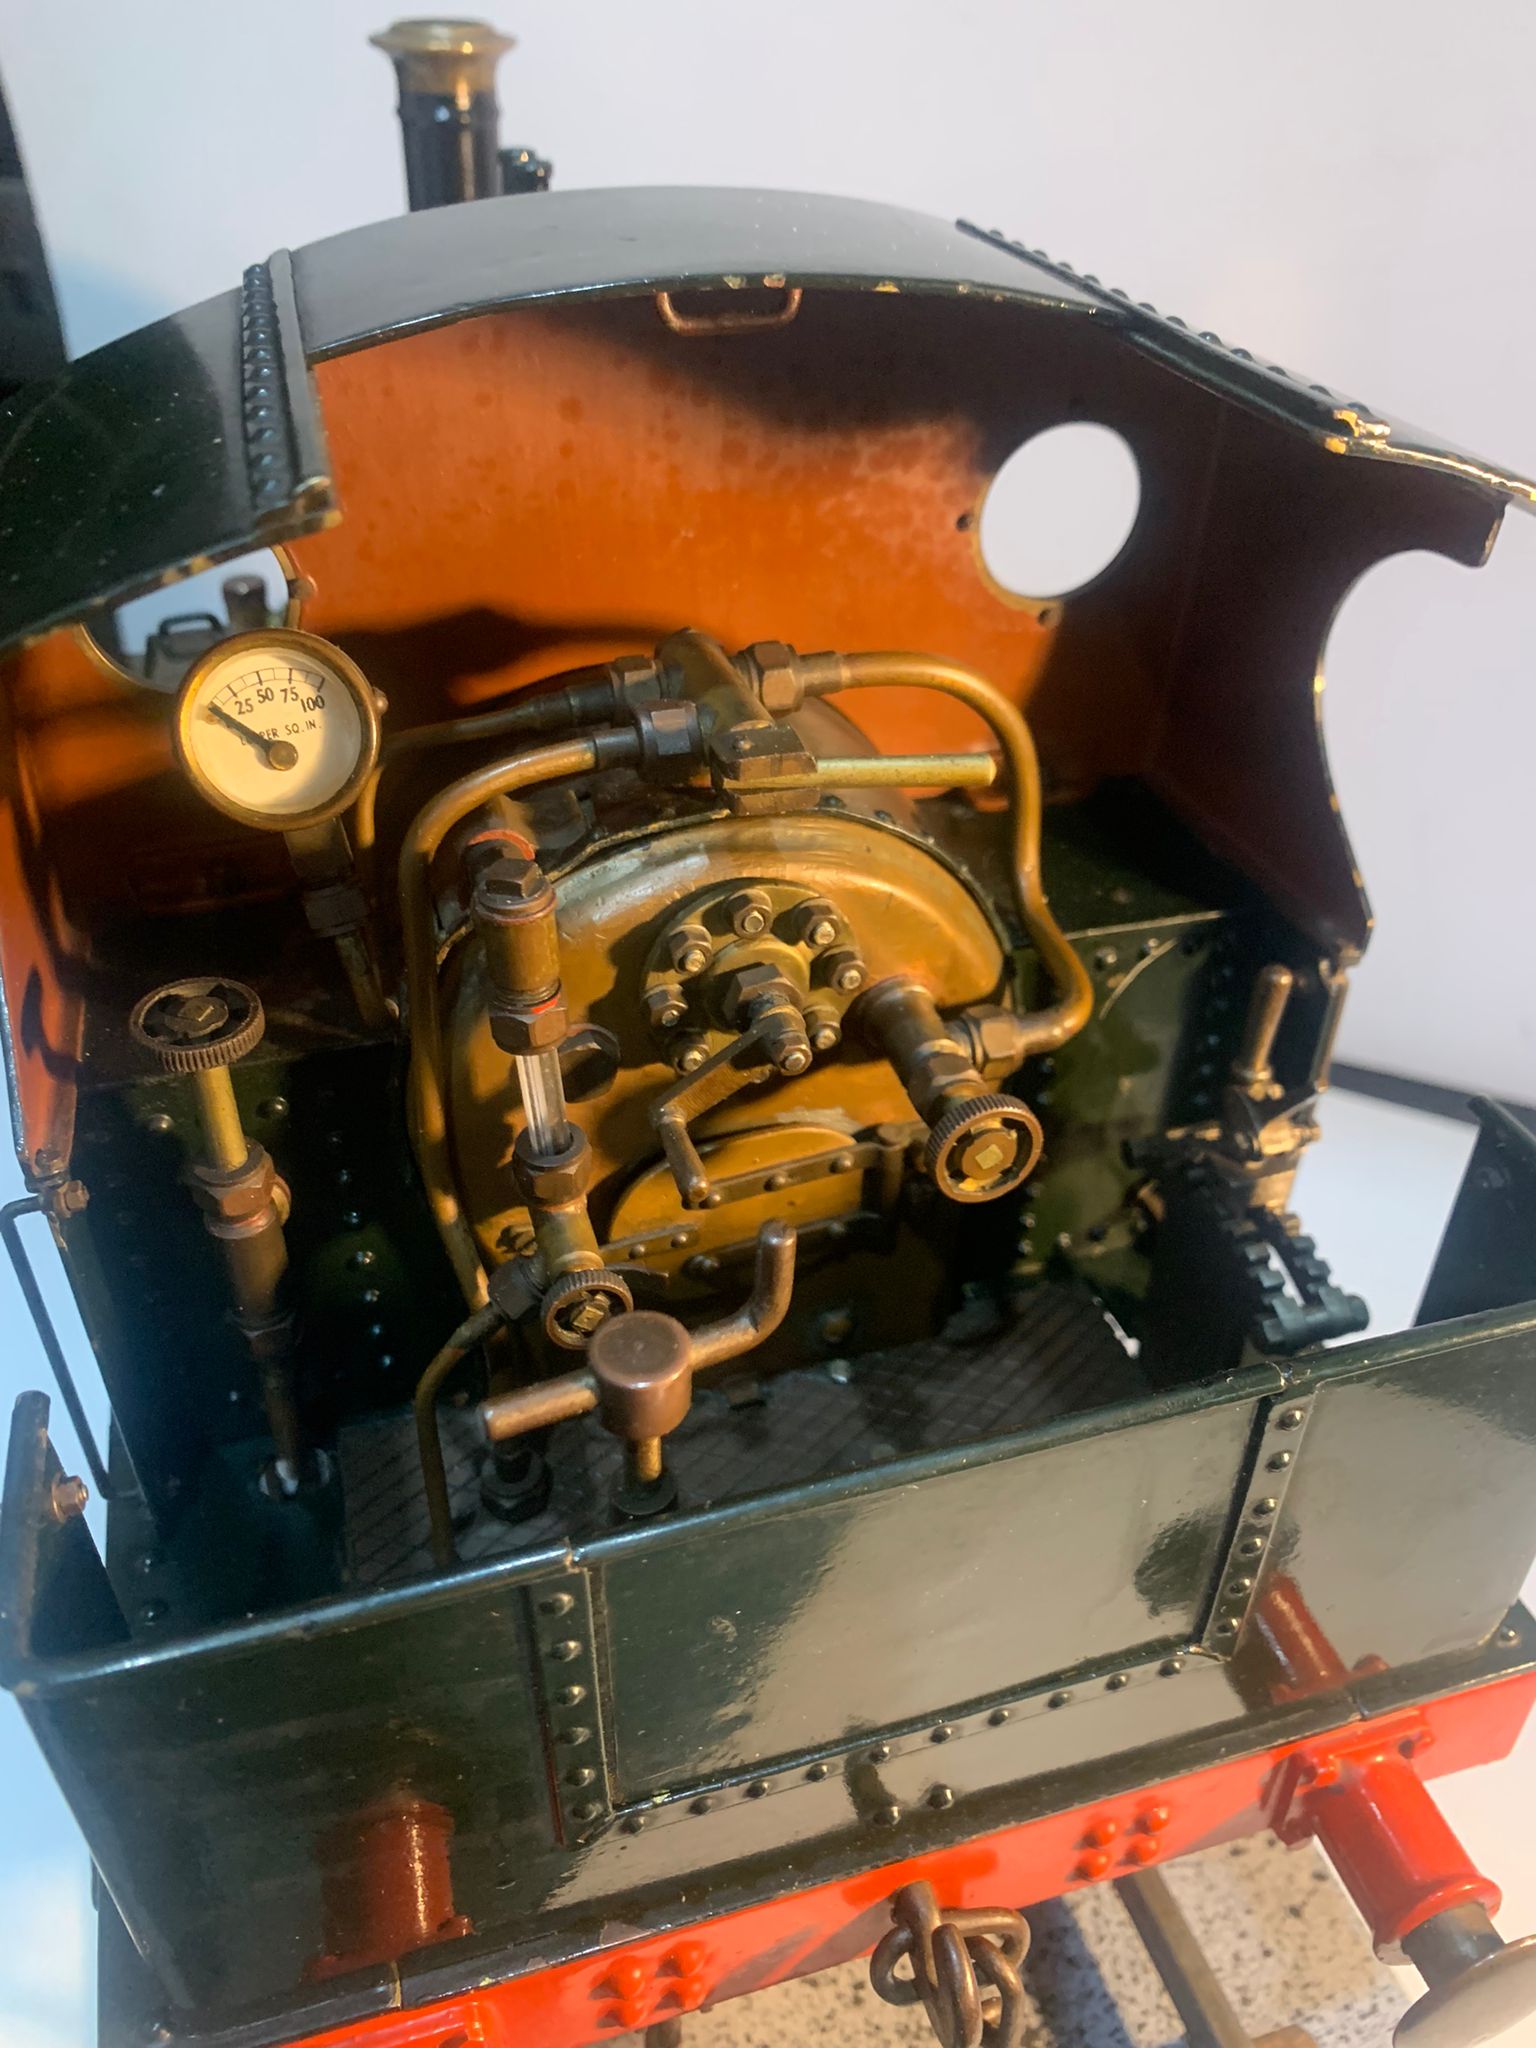 A FULL WORKING MODEL OF A STEAM TRAIN - Image 19 of 22